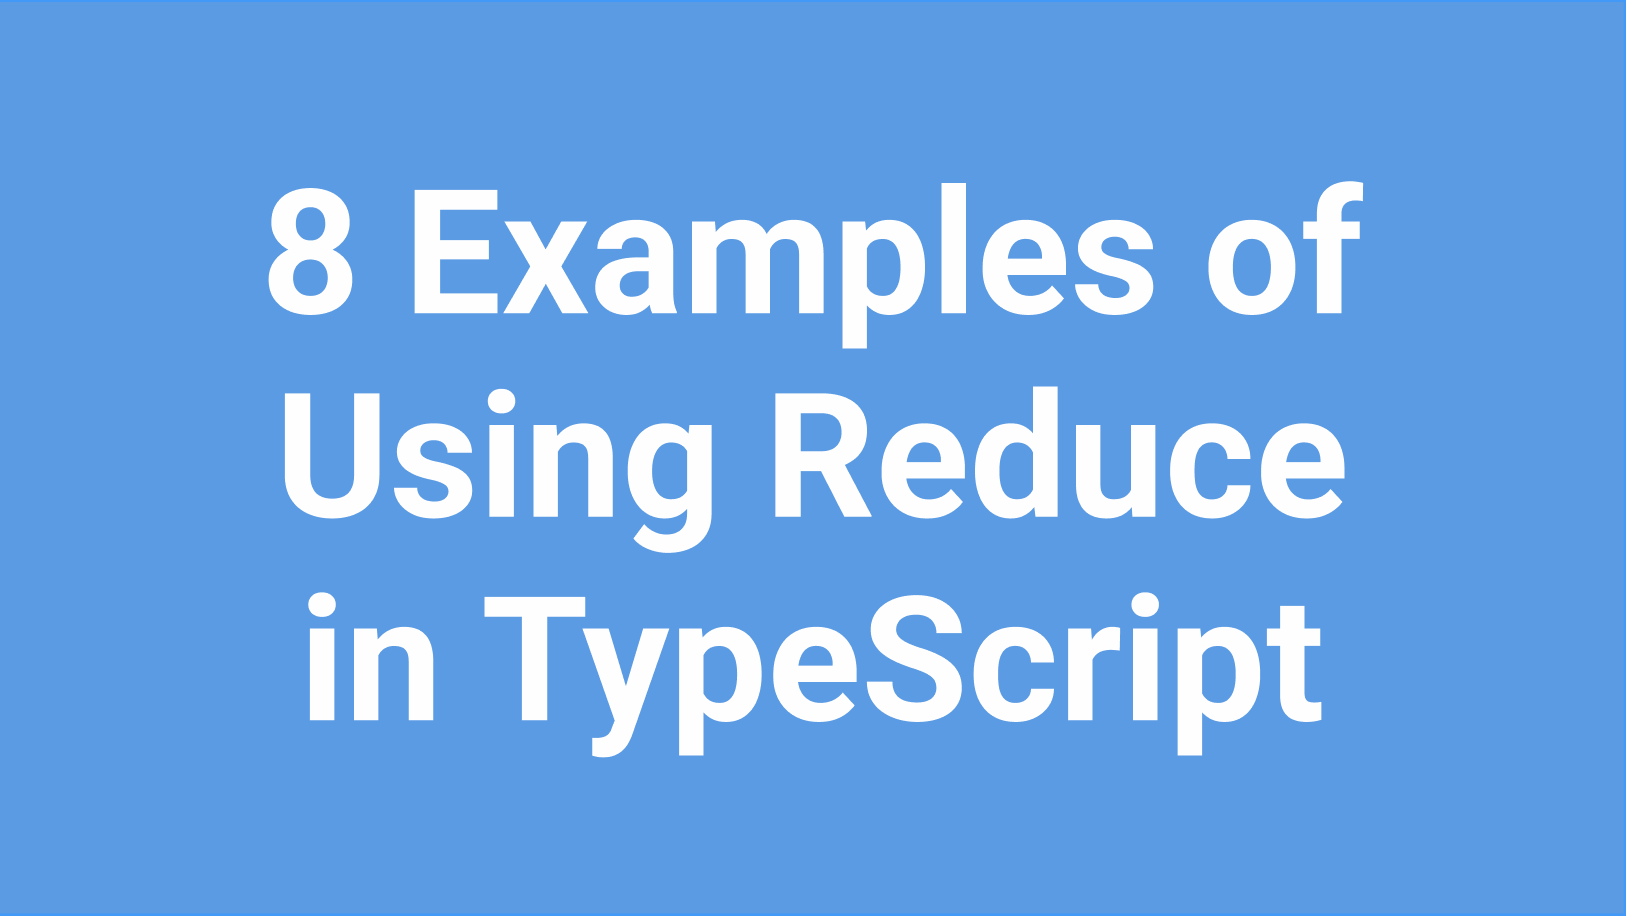 8 Examples of Using Reduce in TypeScript